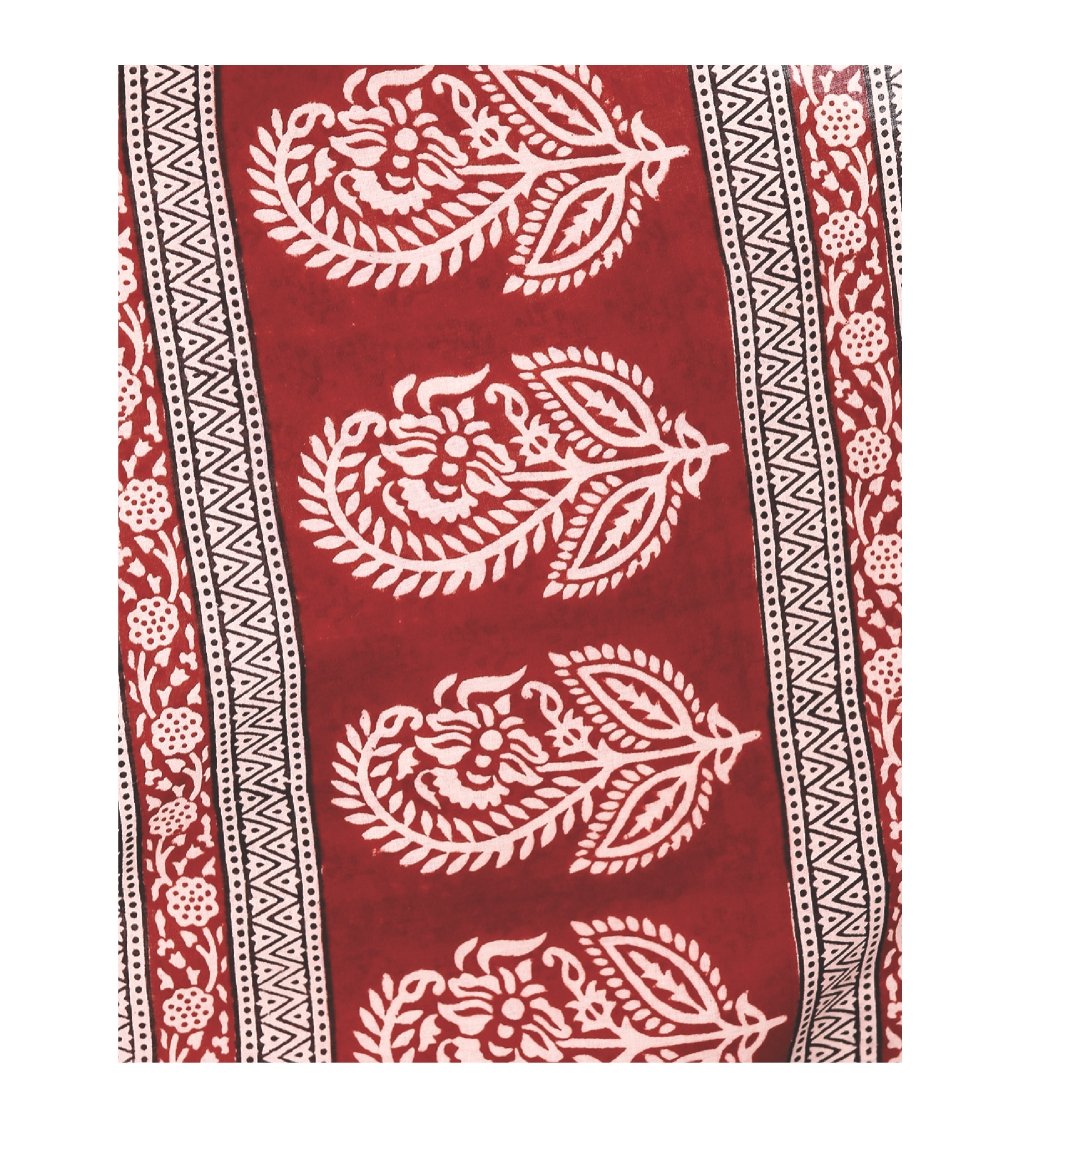 Kalakari India Off-White Bagh Handblock Print Handcrafted Cotton Saree-Saree-Kalakari India-ZIBASA0013-Bagh, Cotton, Geographical Indication, Hand Blocks, Hand Crafted, Heritage Prints, Natural Dyes, Sarees, Sustainable Fabrics-[Linen,Ethnic,wear,Fashionista,Handloom,Handicraft,Indigo,blockprint,block,print,Cotton,Chanderi,Blue, latest,classy,party,bollywood,trendy,summer,style,traditional,formal,elegant,unique,style,hand,block,print, dabu,booti,gift,present,glamorous,affordable,collectible,Sari